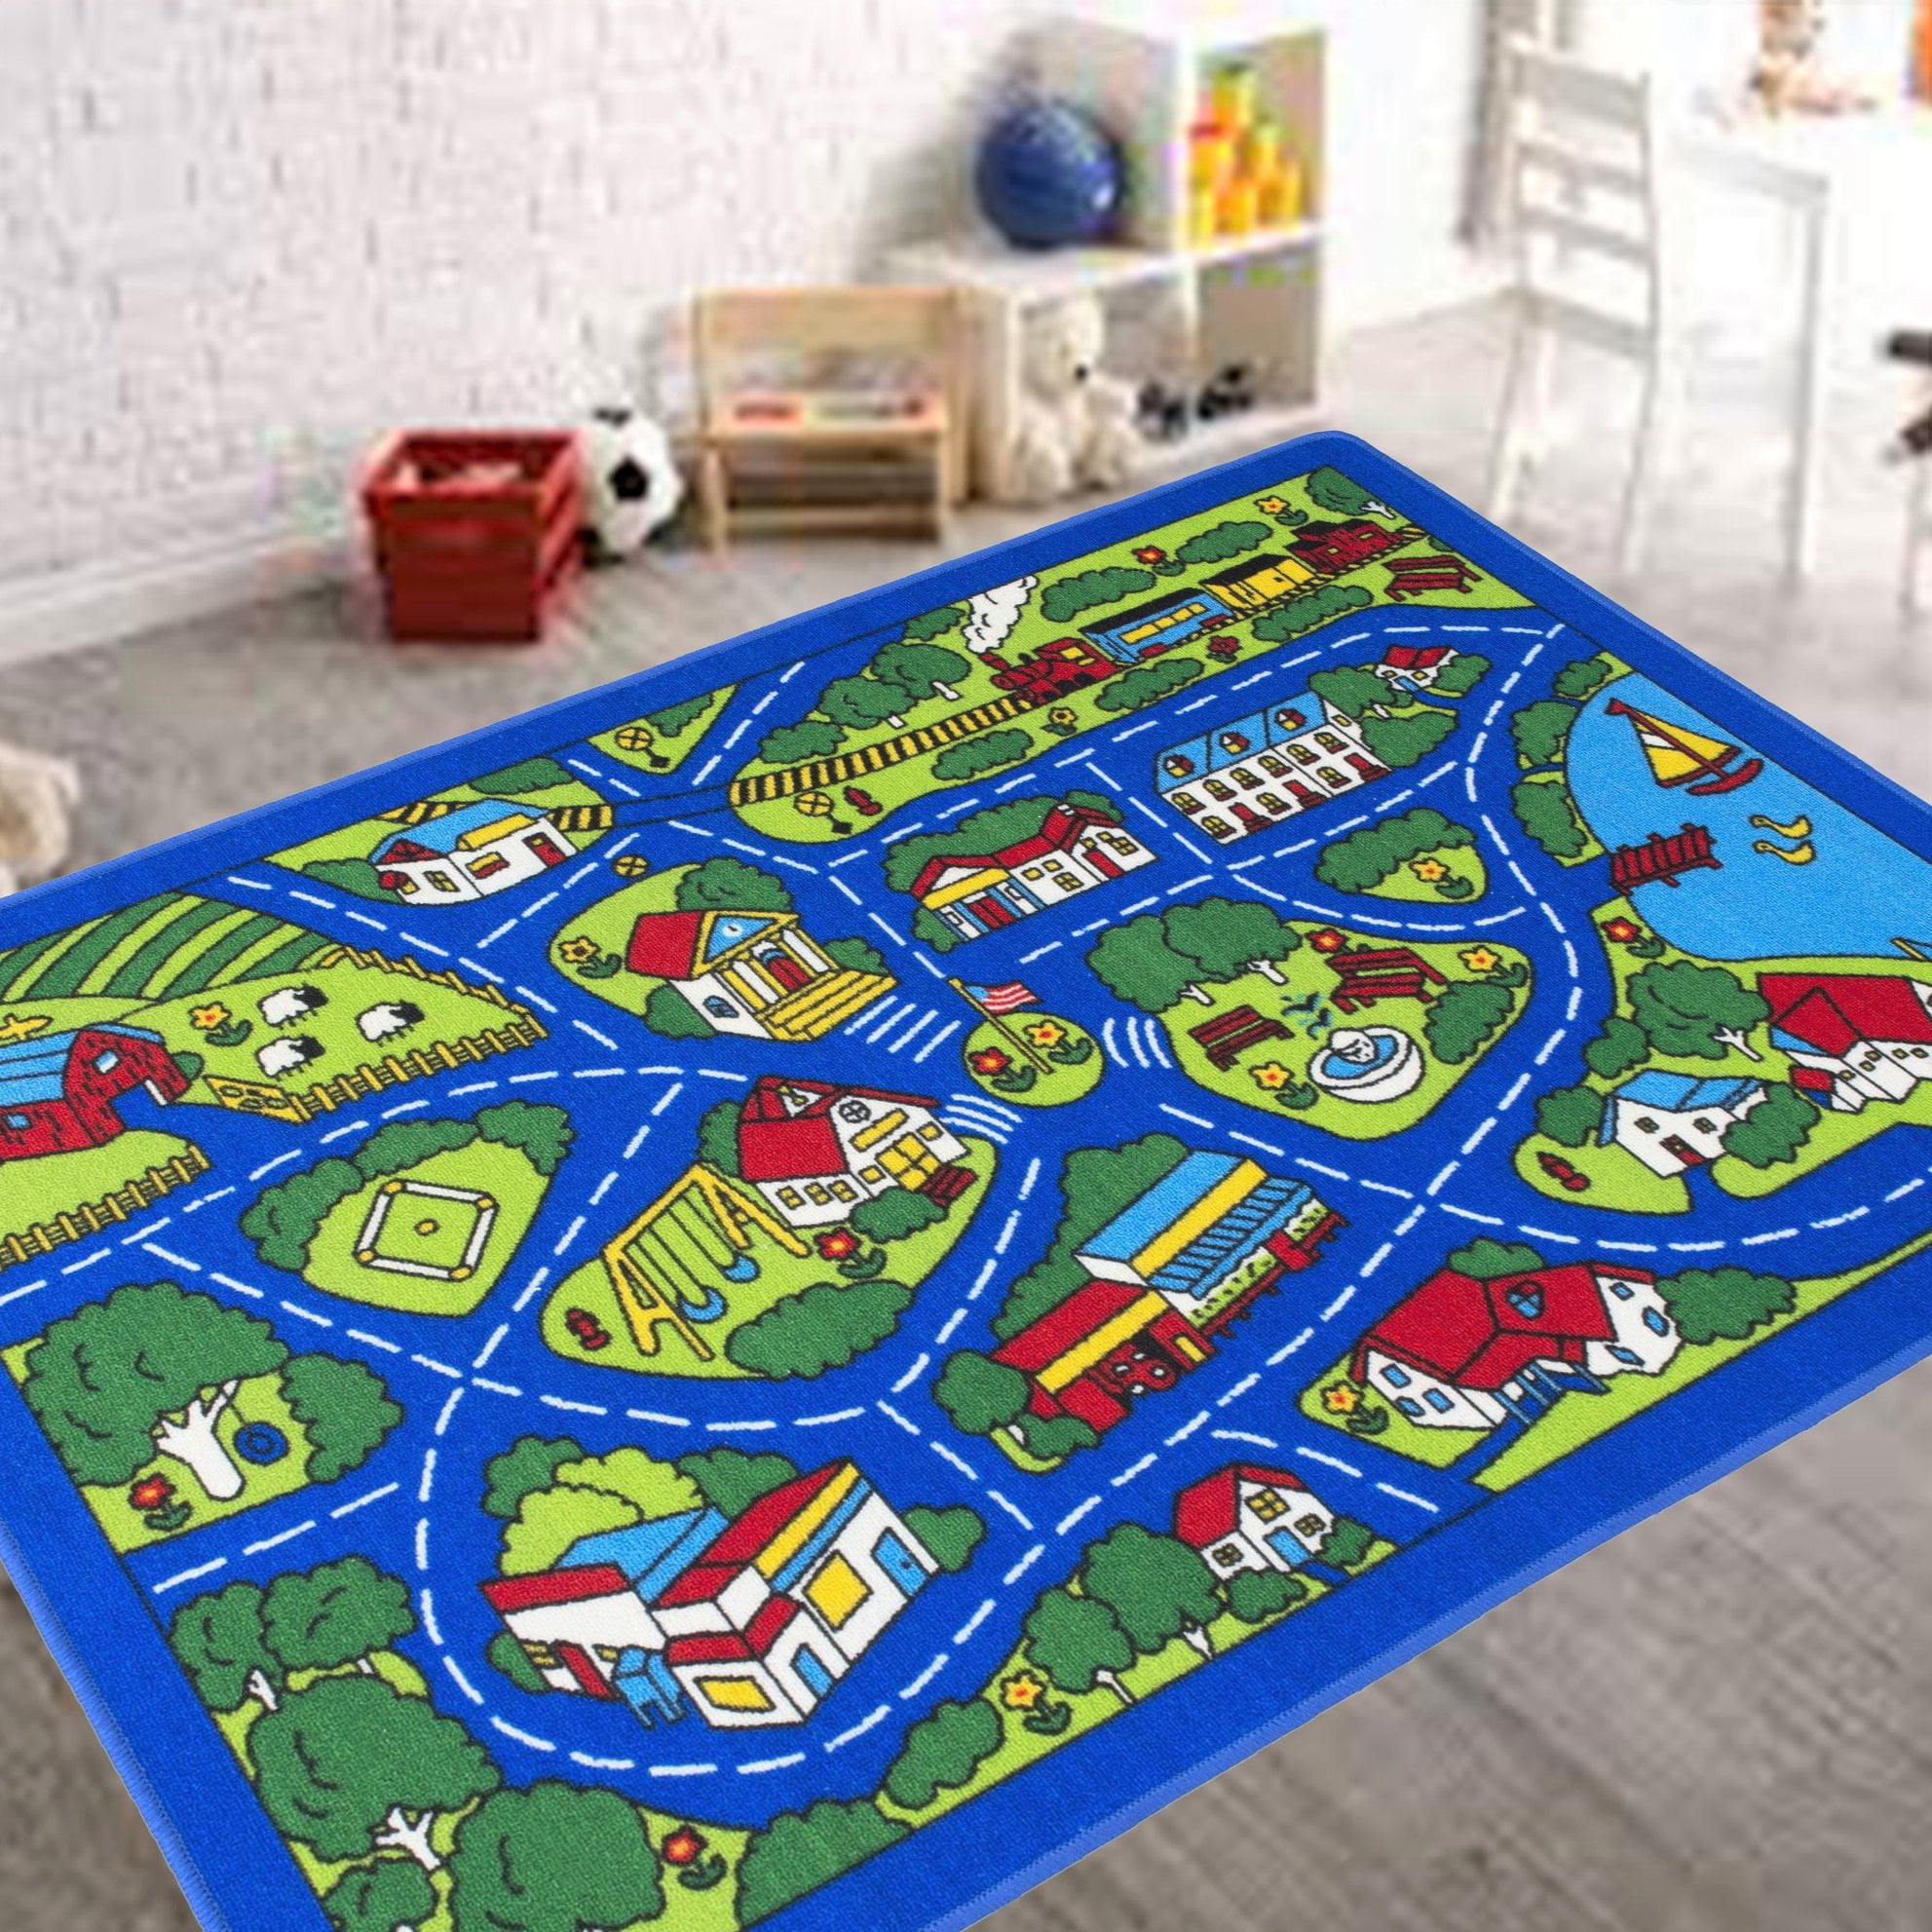 NEW PLAYMAT COUNTING CHILDRENS EDUCATIONAL LARGE MAT RUG SCHOOL HOME 200X300CM